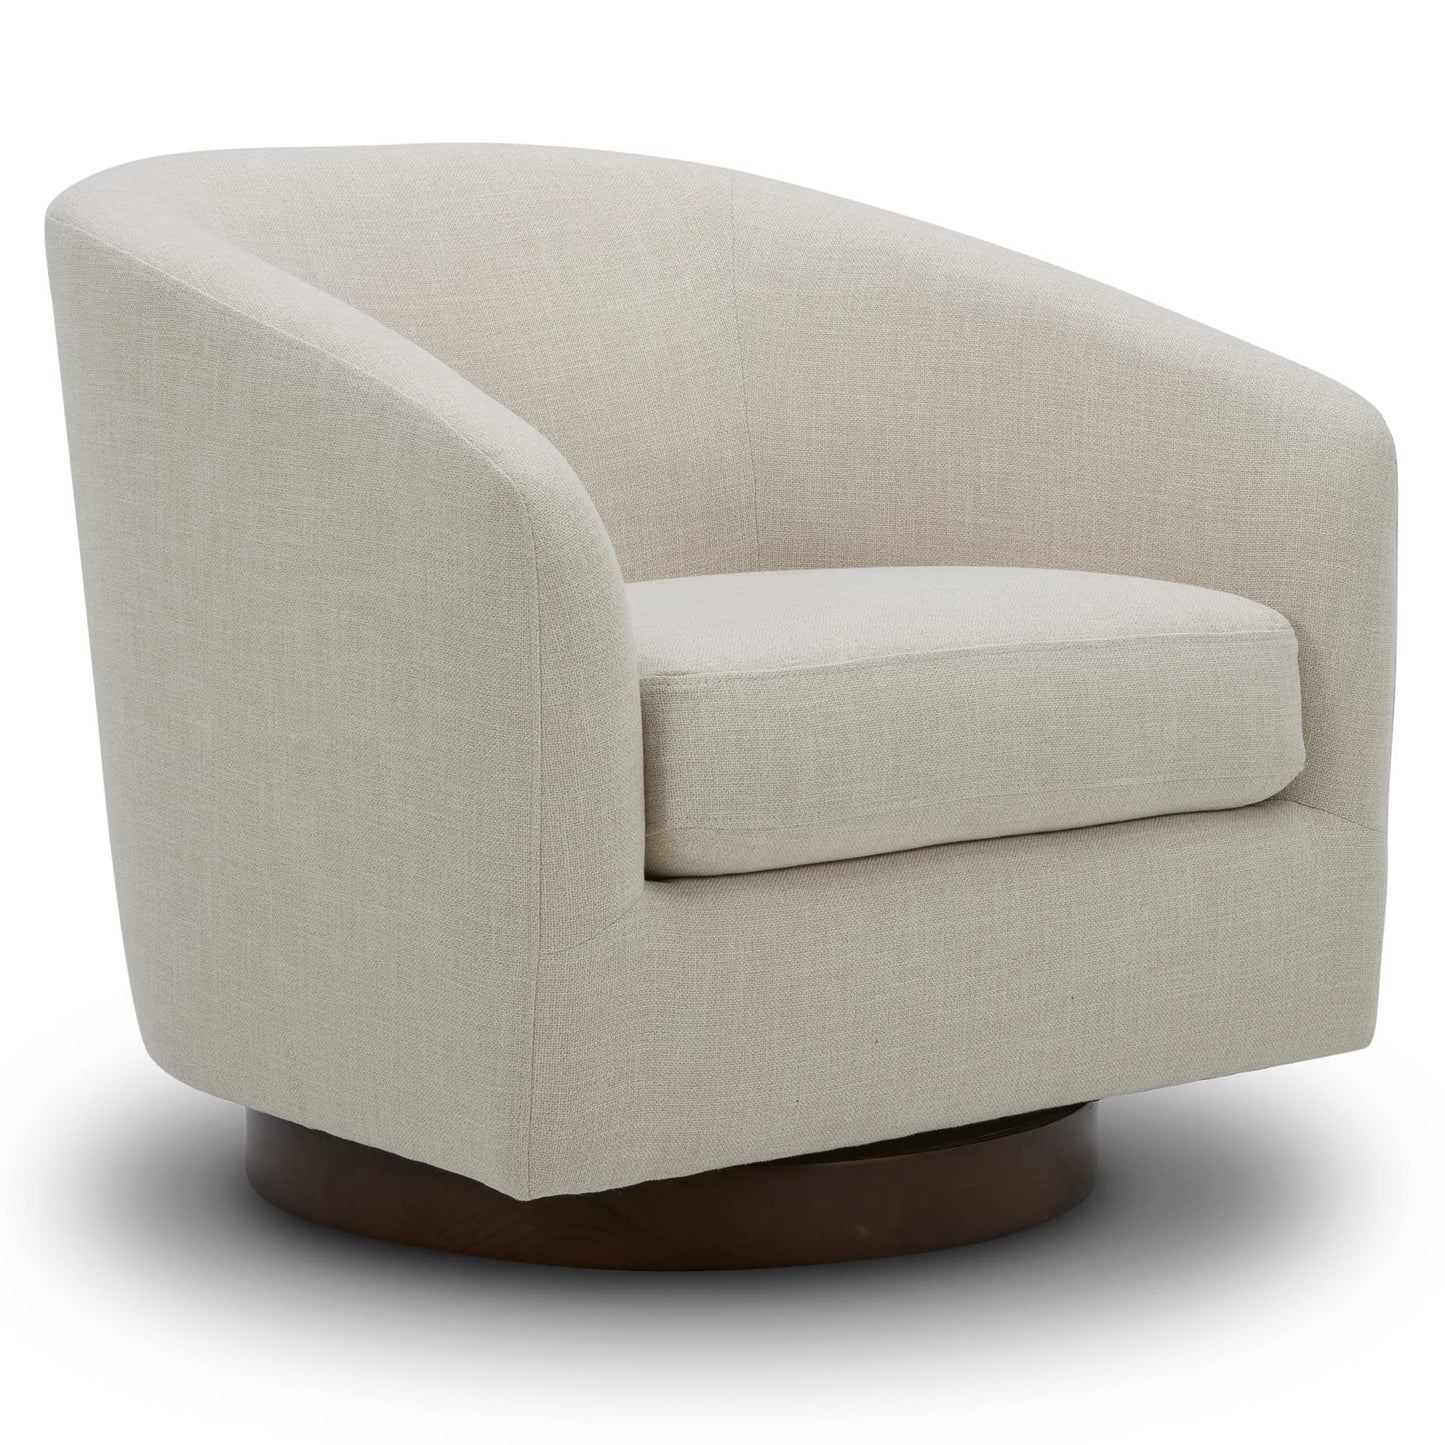 CHITA Swivel Accent Chair Armchair, Round Barrel Chair in Fabric for Living Room Bedroom, Linen